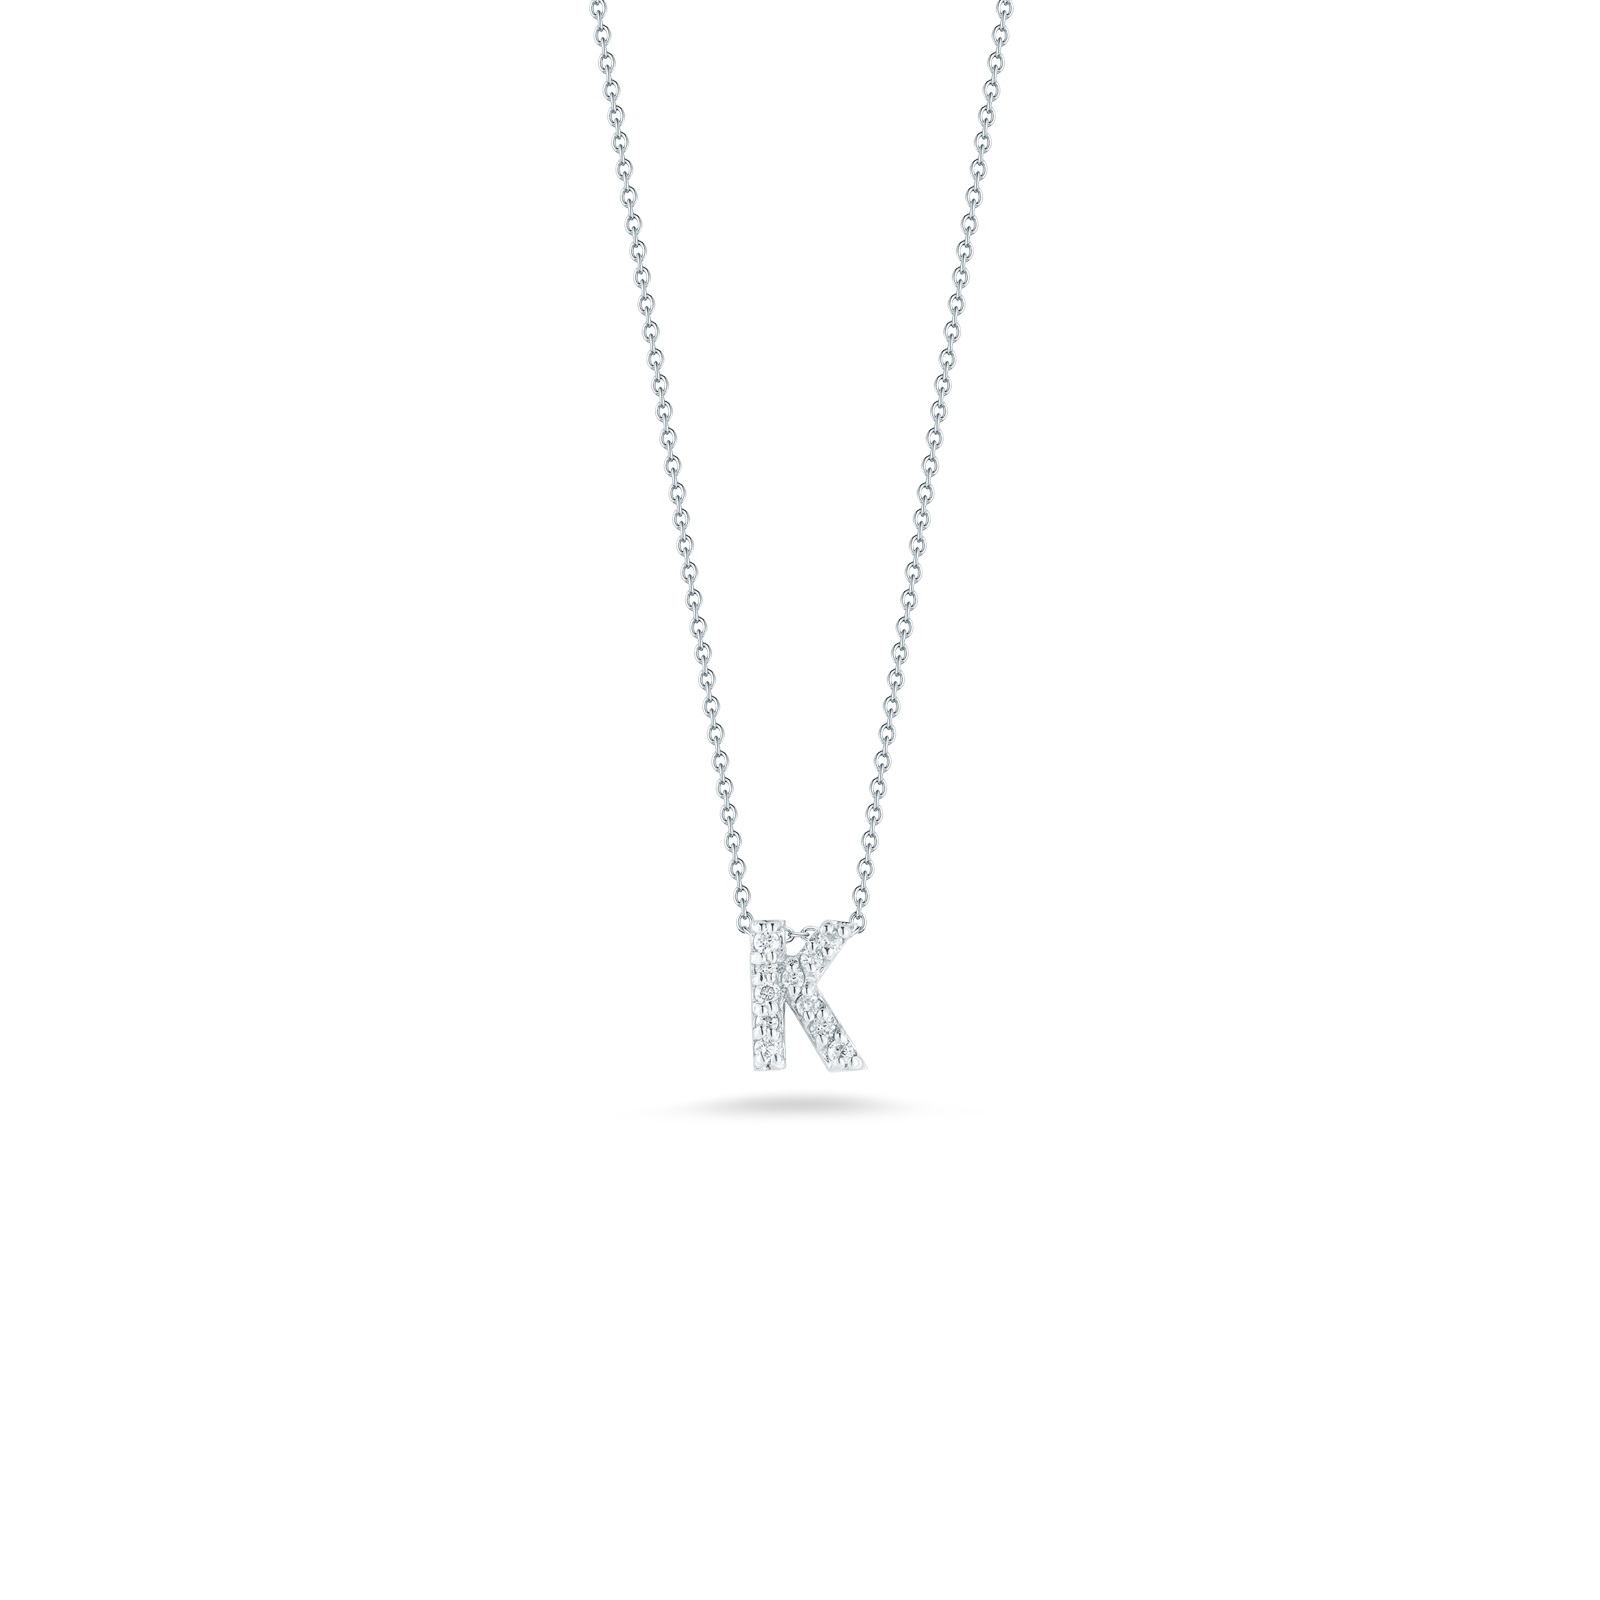 Tiffany & Co Sterling Silver Letter K Script Initial Pendant with Ball  Chain | eBay